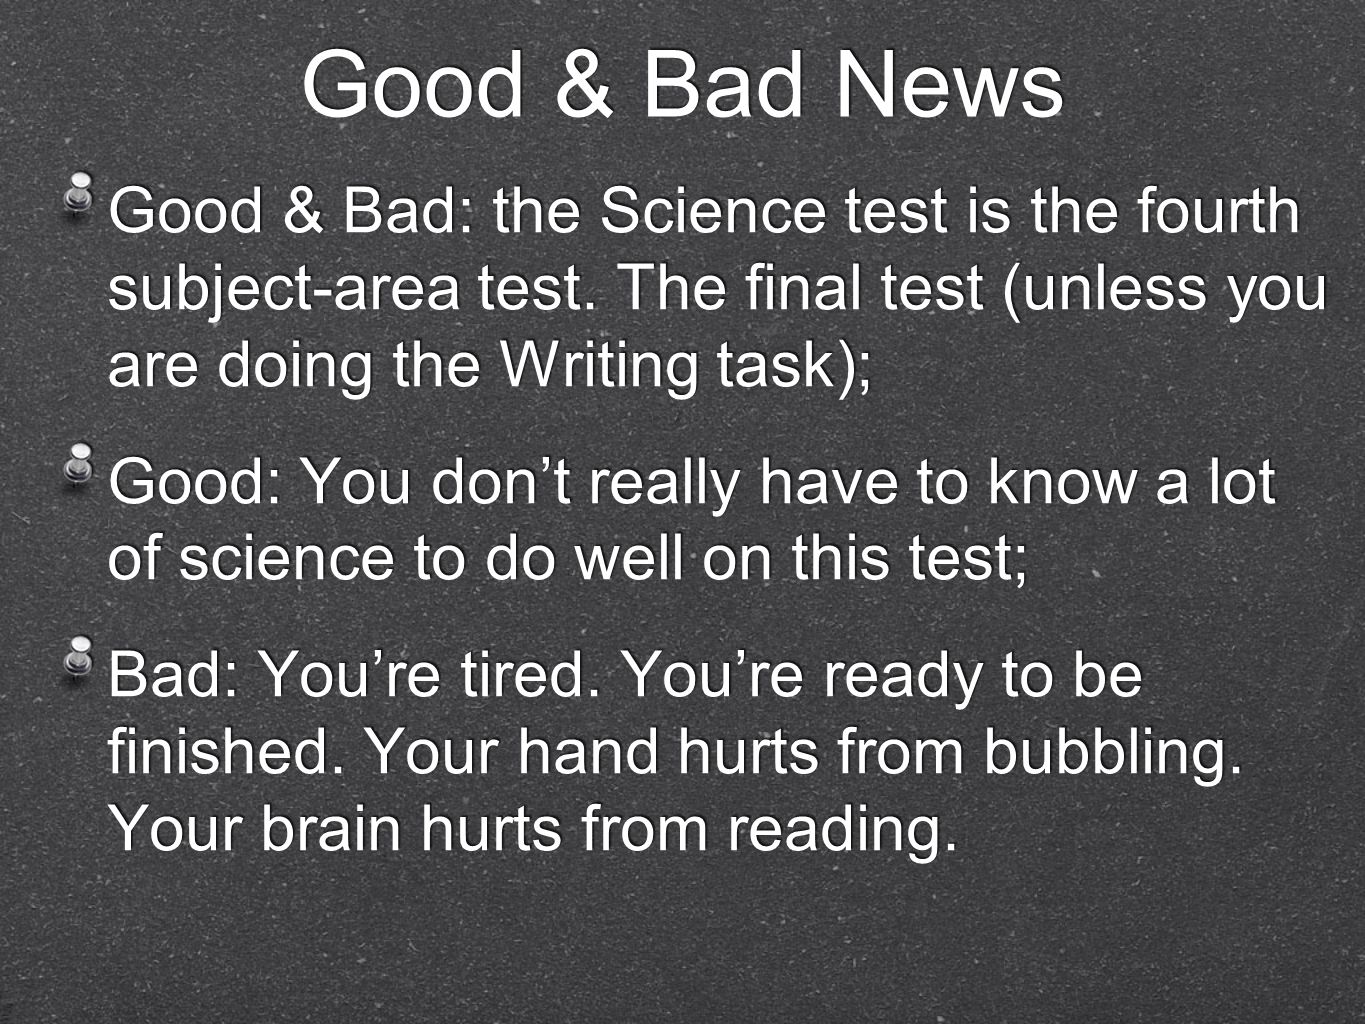 Good & Bad News Good & Bad: the Science test is the fourth subject-area test.